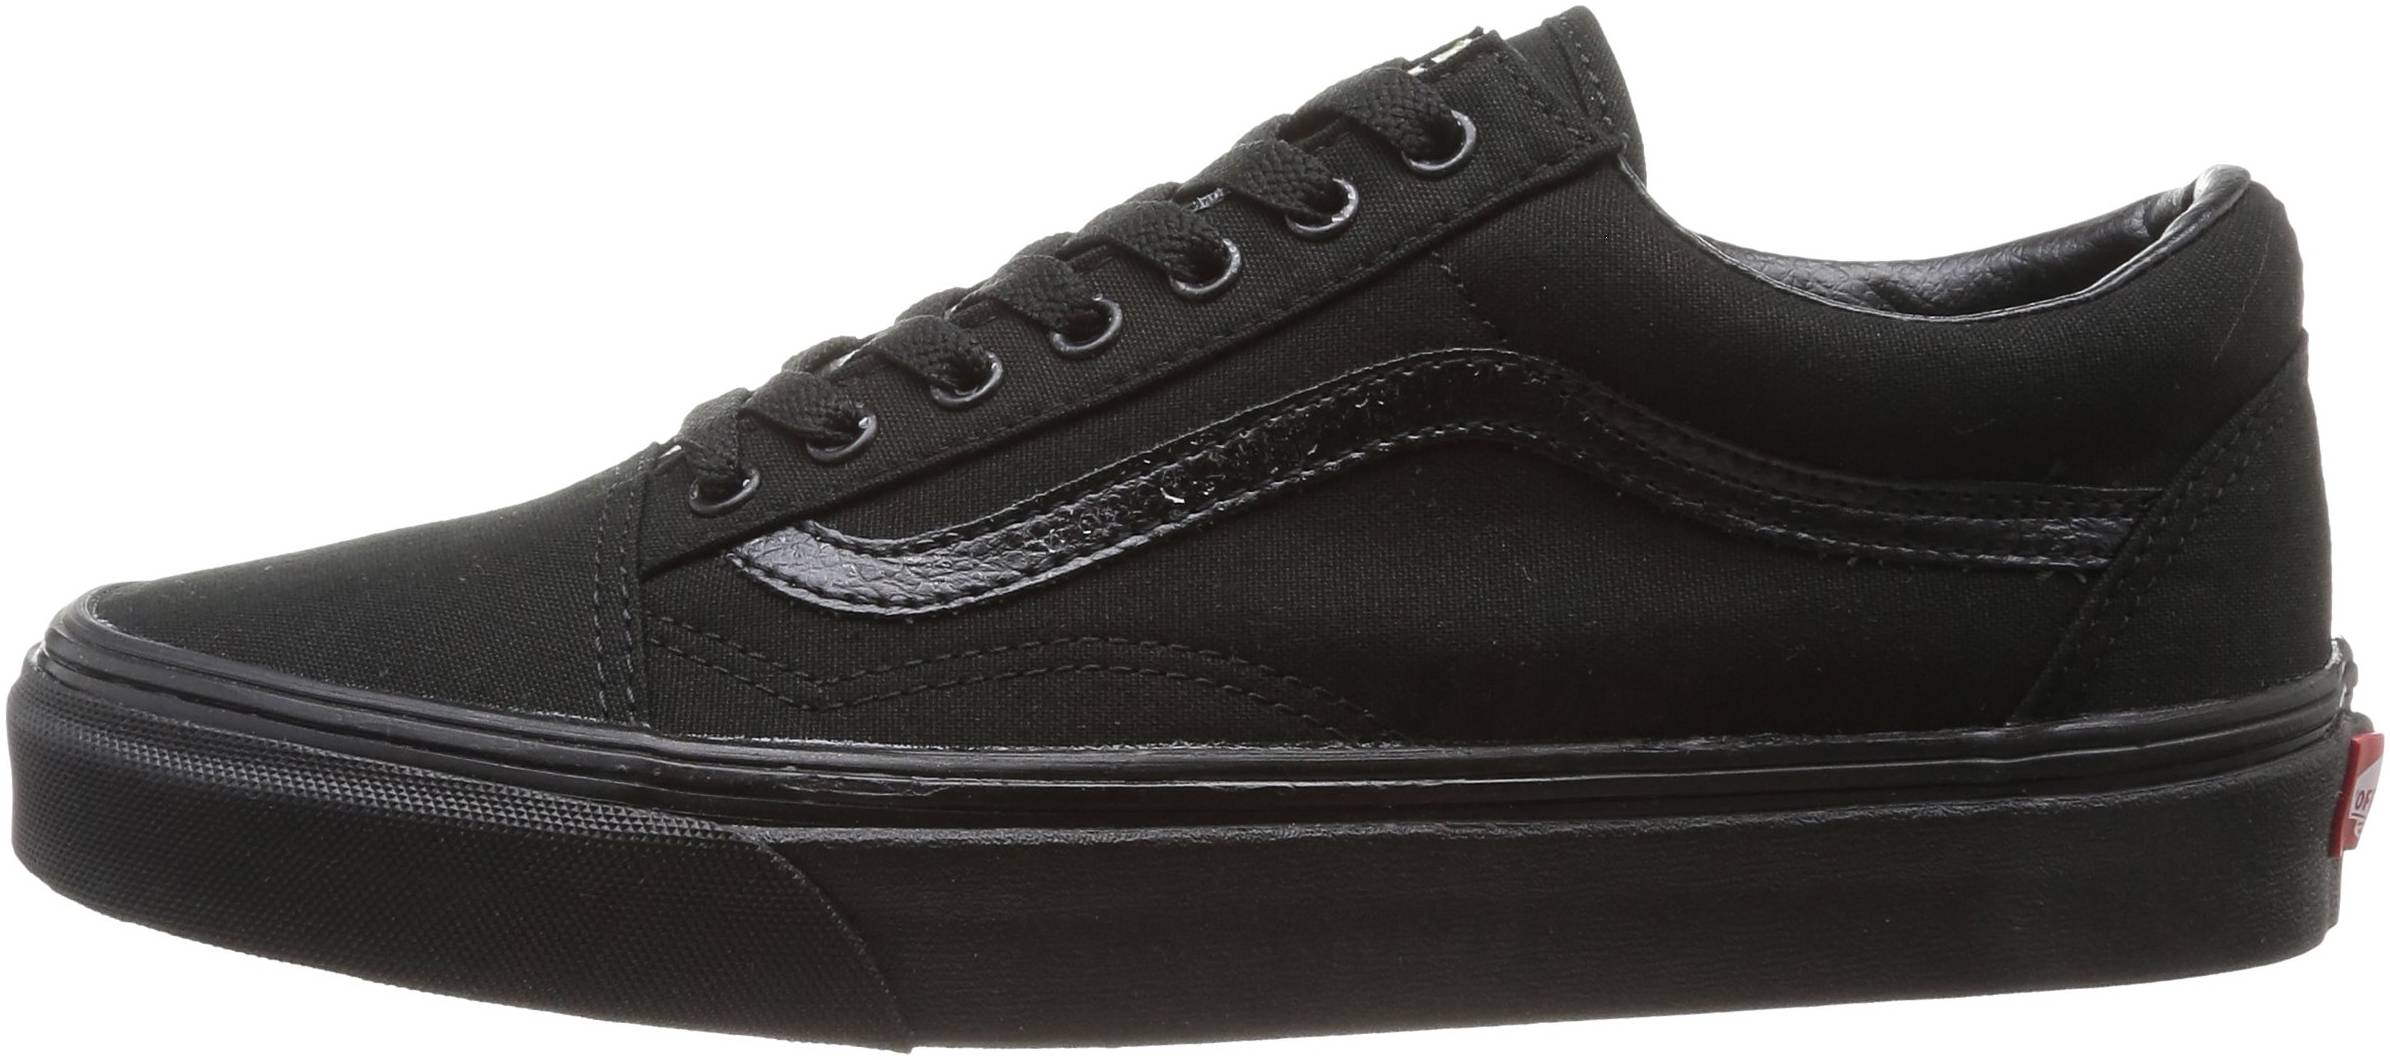 how much are black vans